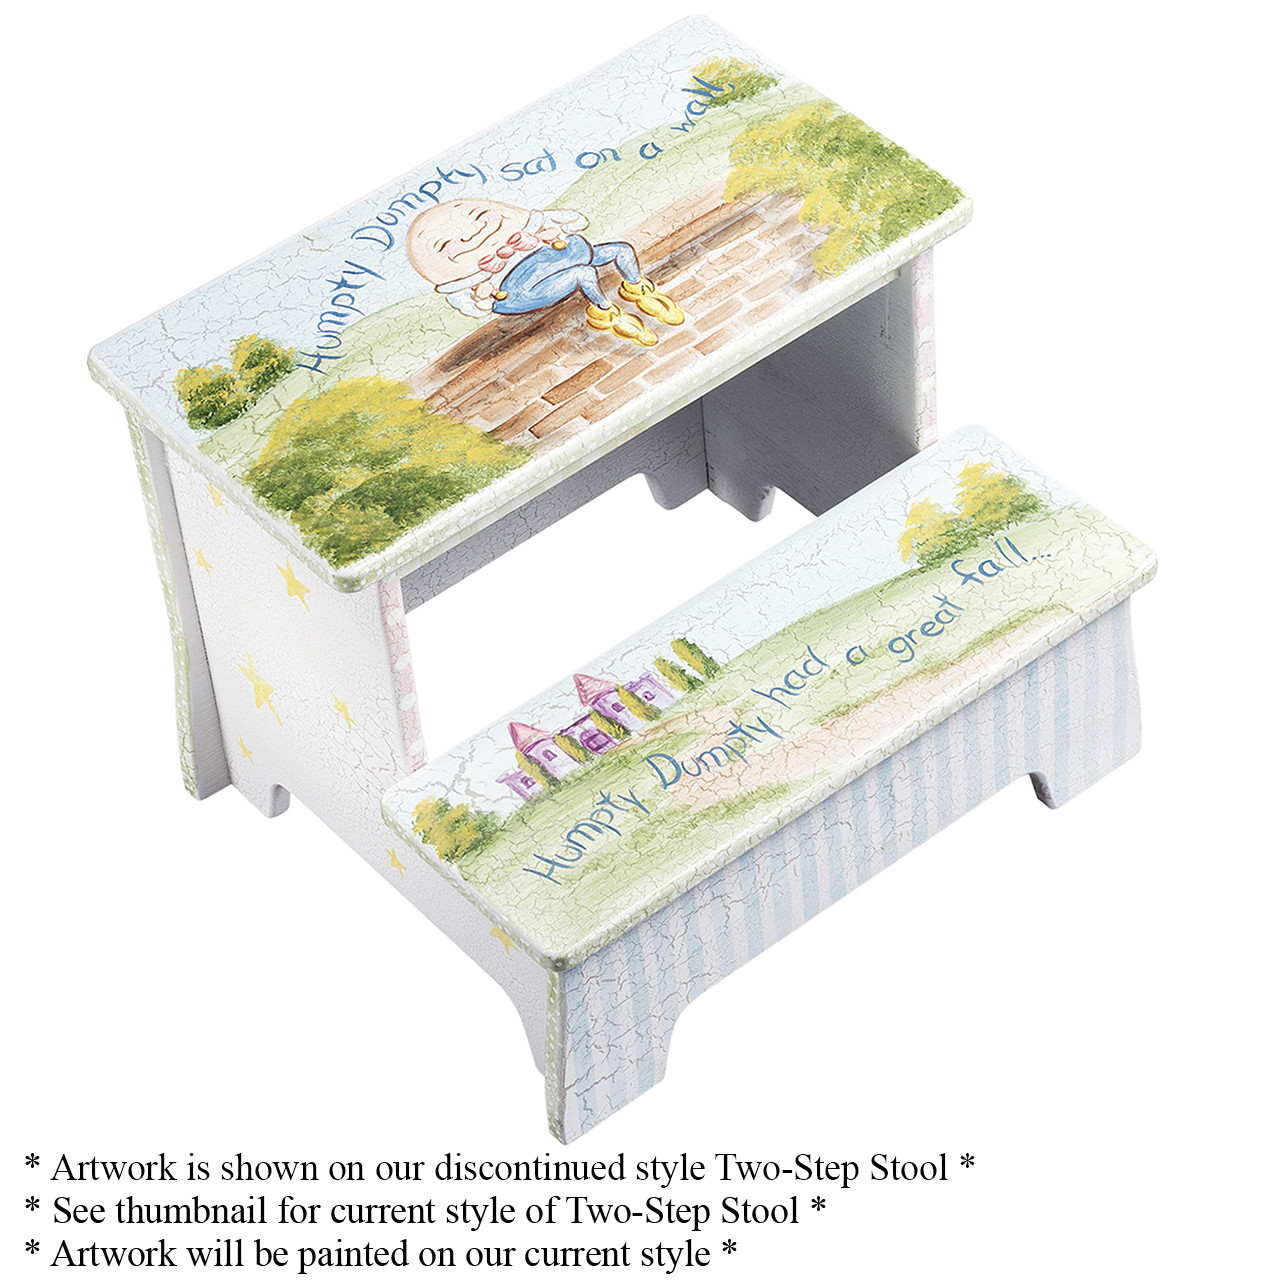 https://cdn1.bigcommerce.com/server1200/ccawr9j/products/4980/images/9467/Two-Step_Stool_-_Nursery_Rhymes_-_Humpty_-_Crackle_-_1280__29310.1565675221.1280.1280.jpg?c=2